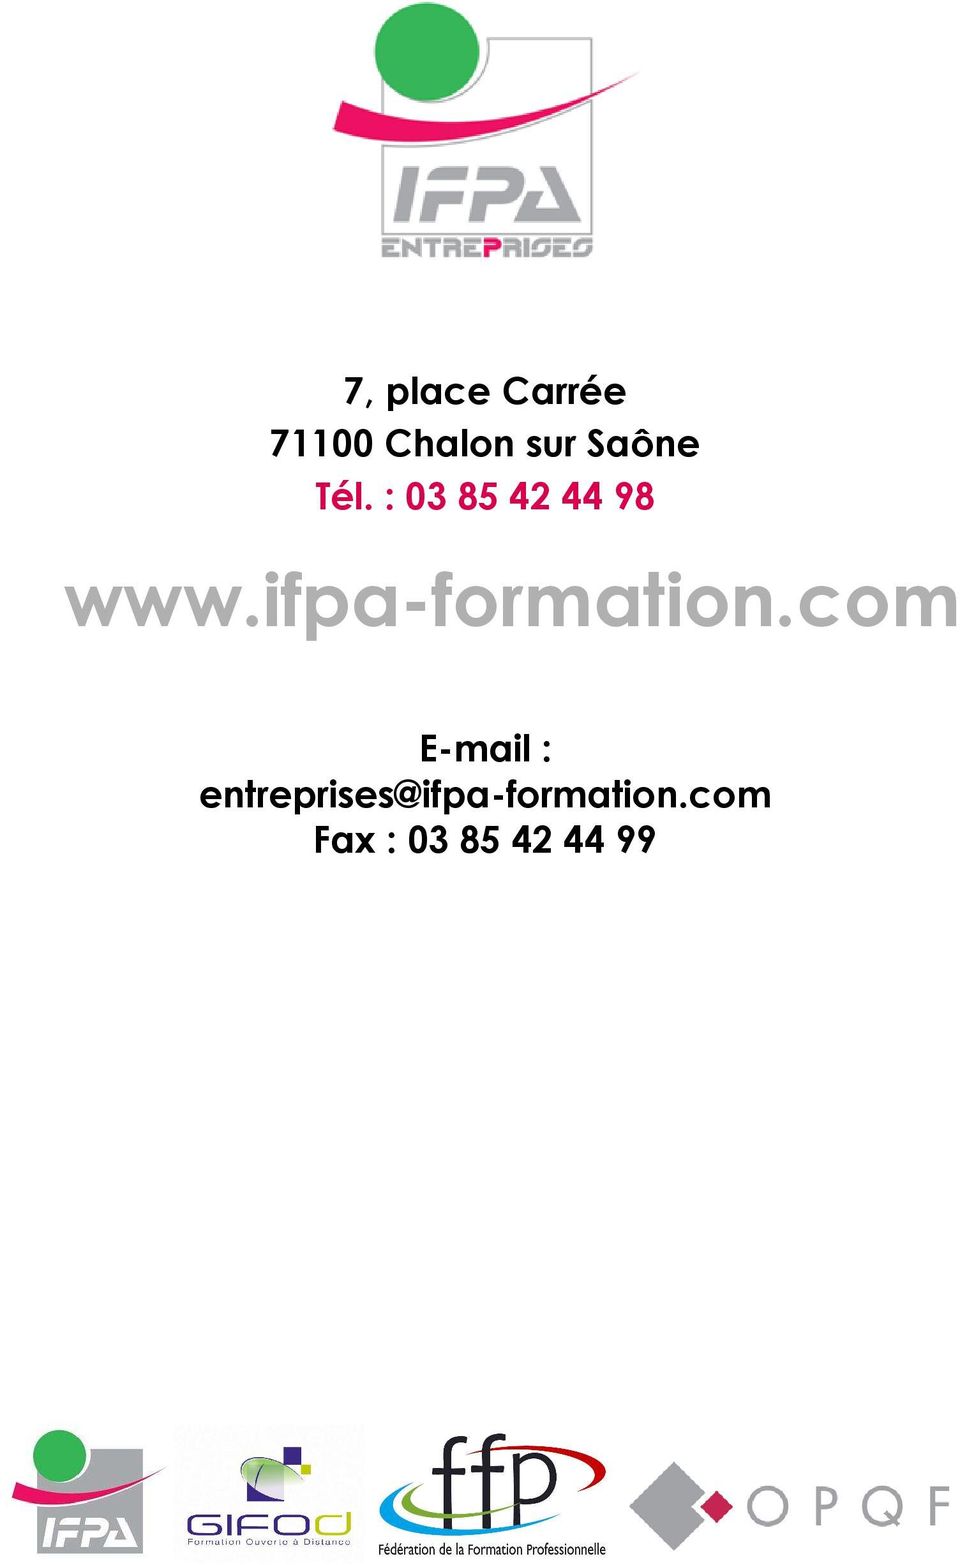 ifpa-formation.